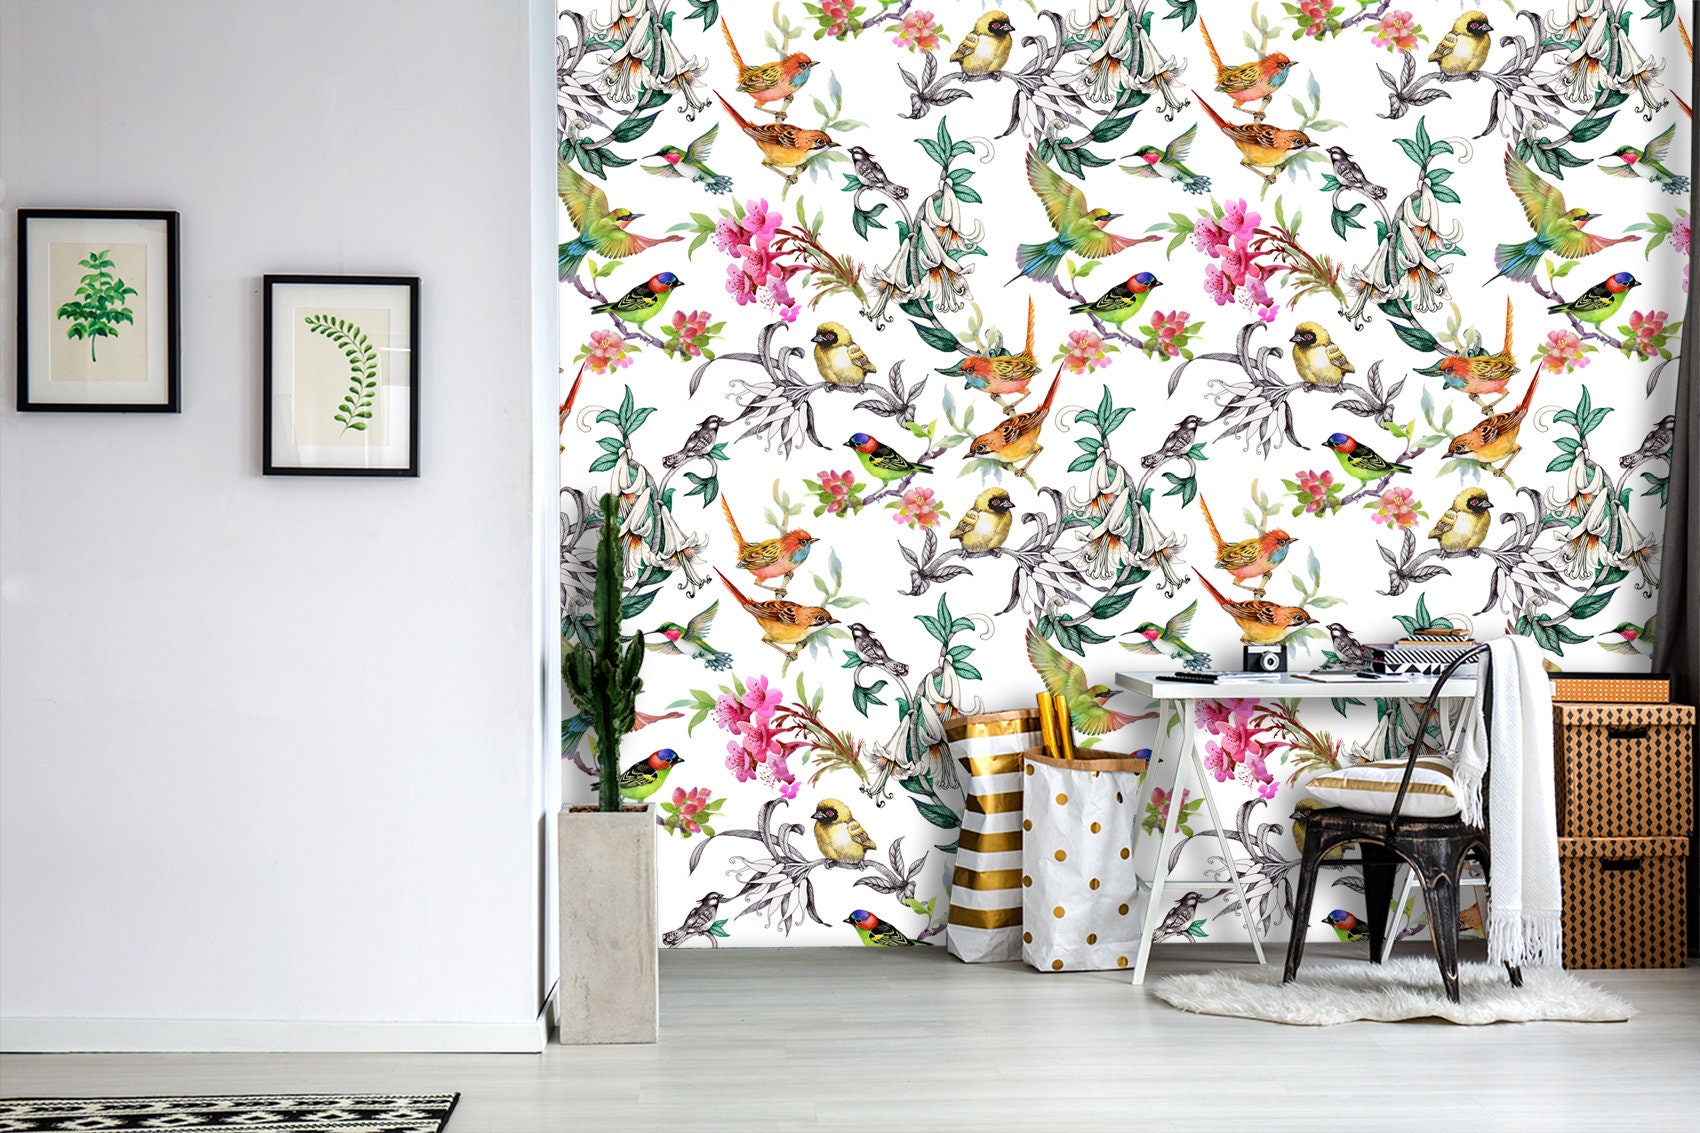 HotDecor 24x118 Bird Boho Floral Wallpaper Flower Wallpaper Peel and  Stick Floral Contact Paper Adhesive Stick on Botanical Wall Paper for Walls